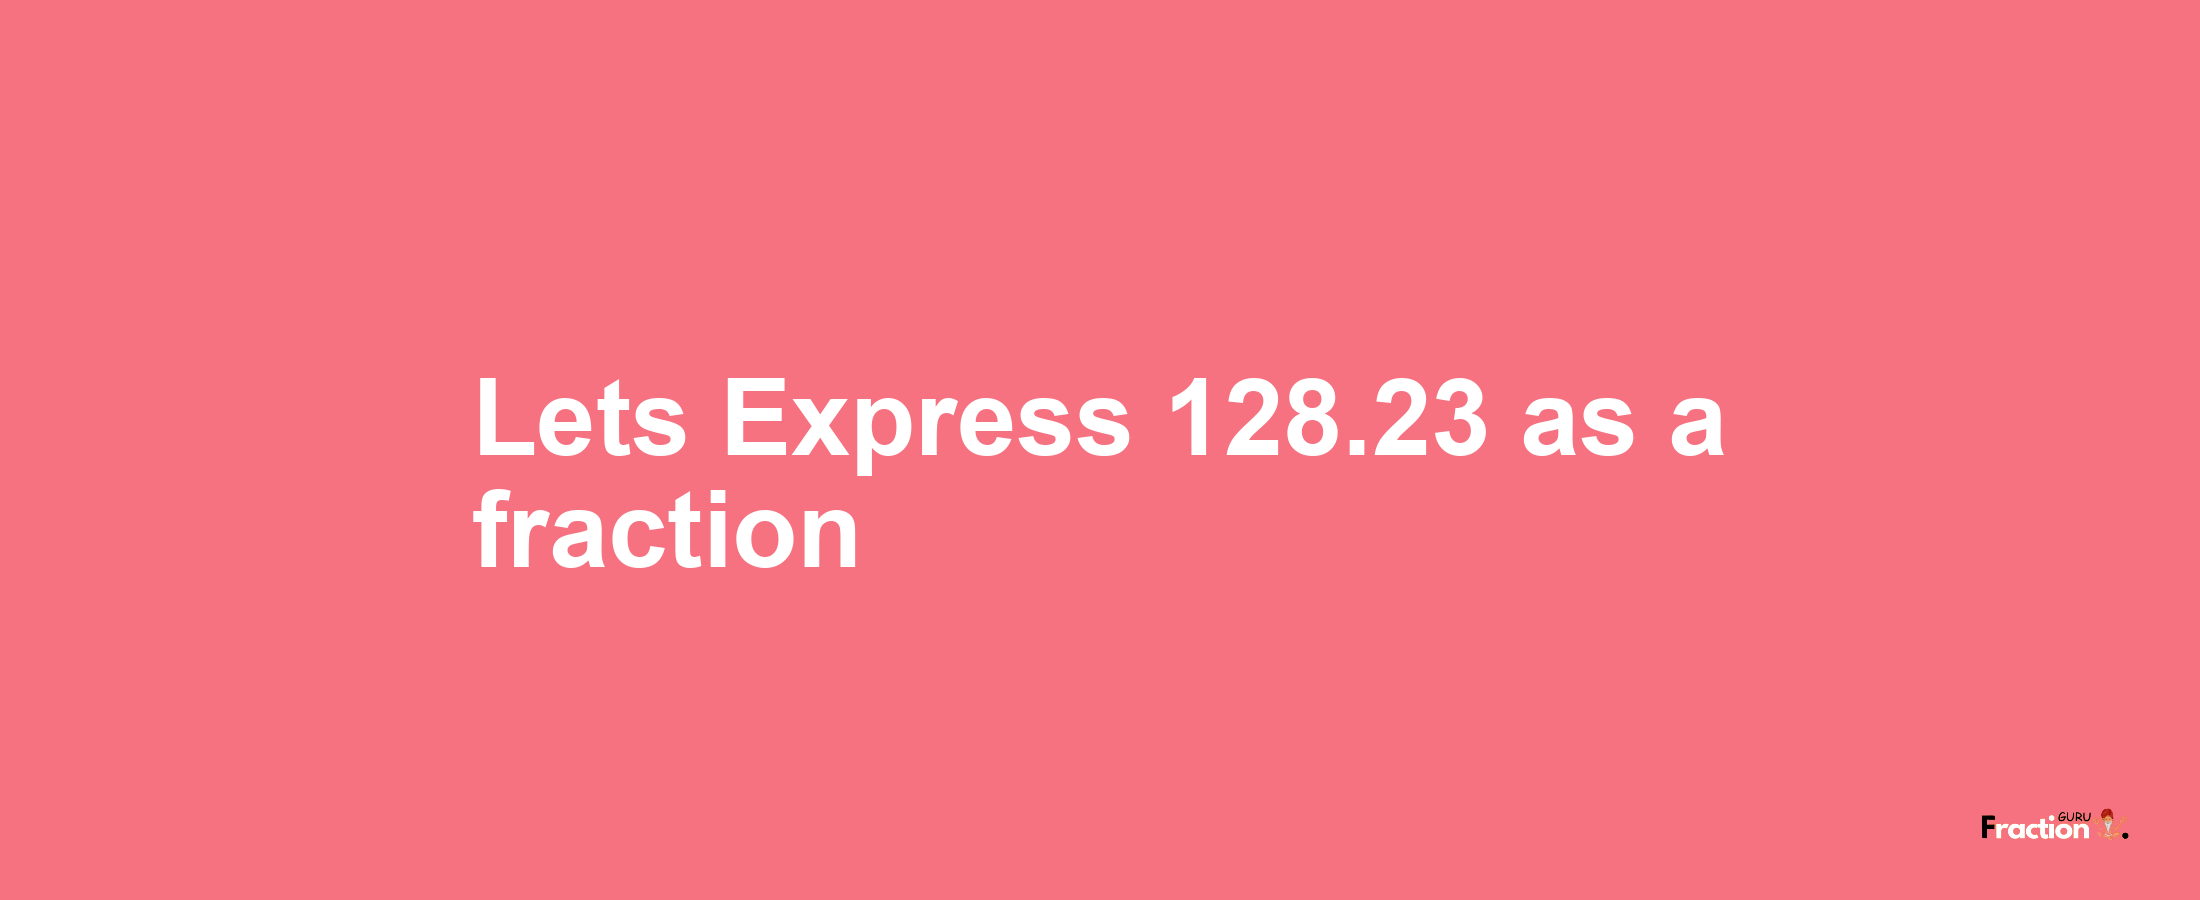 Lets Express 128.23 as afraction